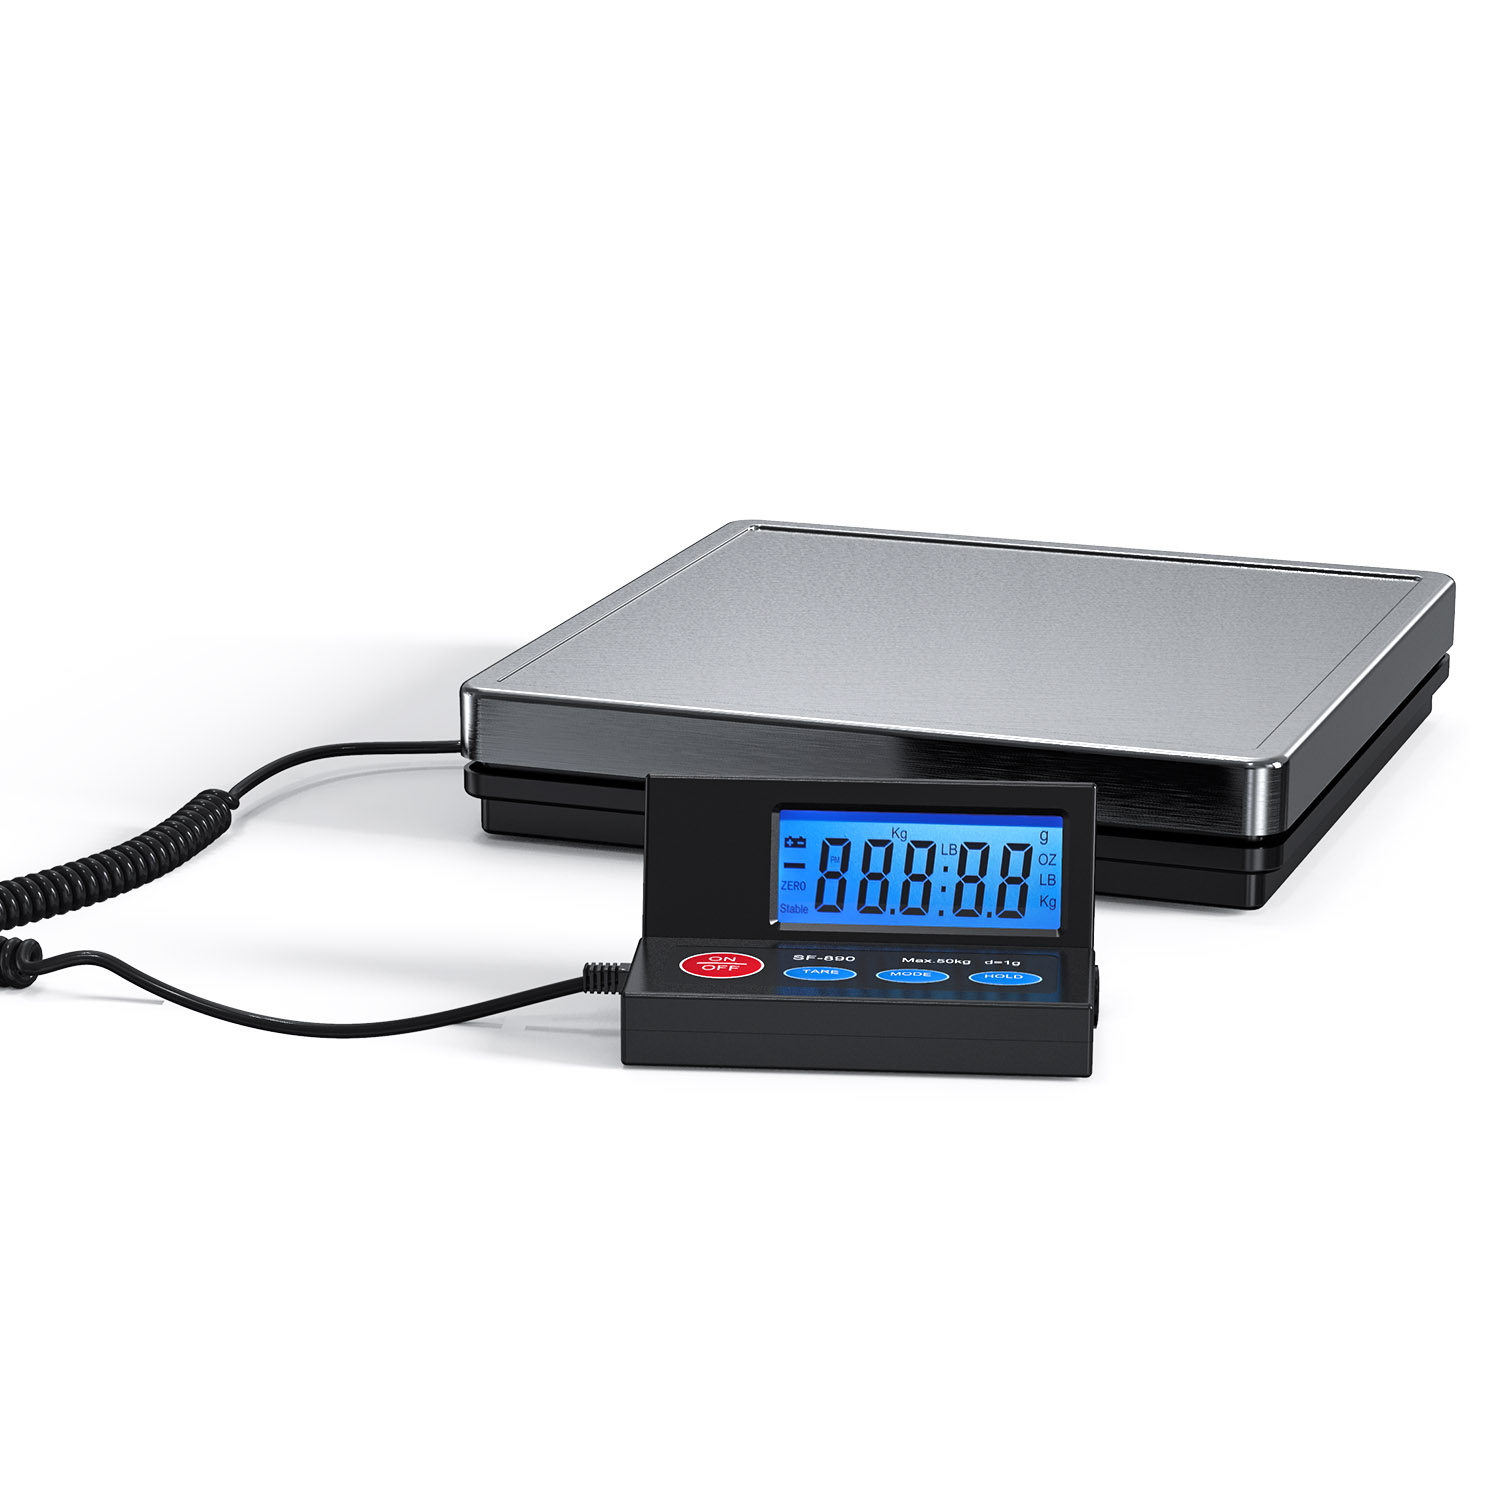 Suofei SF-890 Cheapest Large LCD ABS Material Electronic Digital Postal Shipping Weight Postal Scale